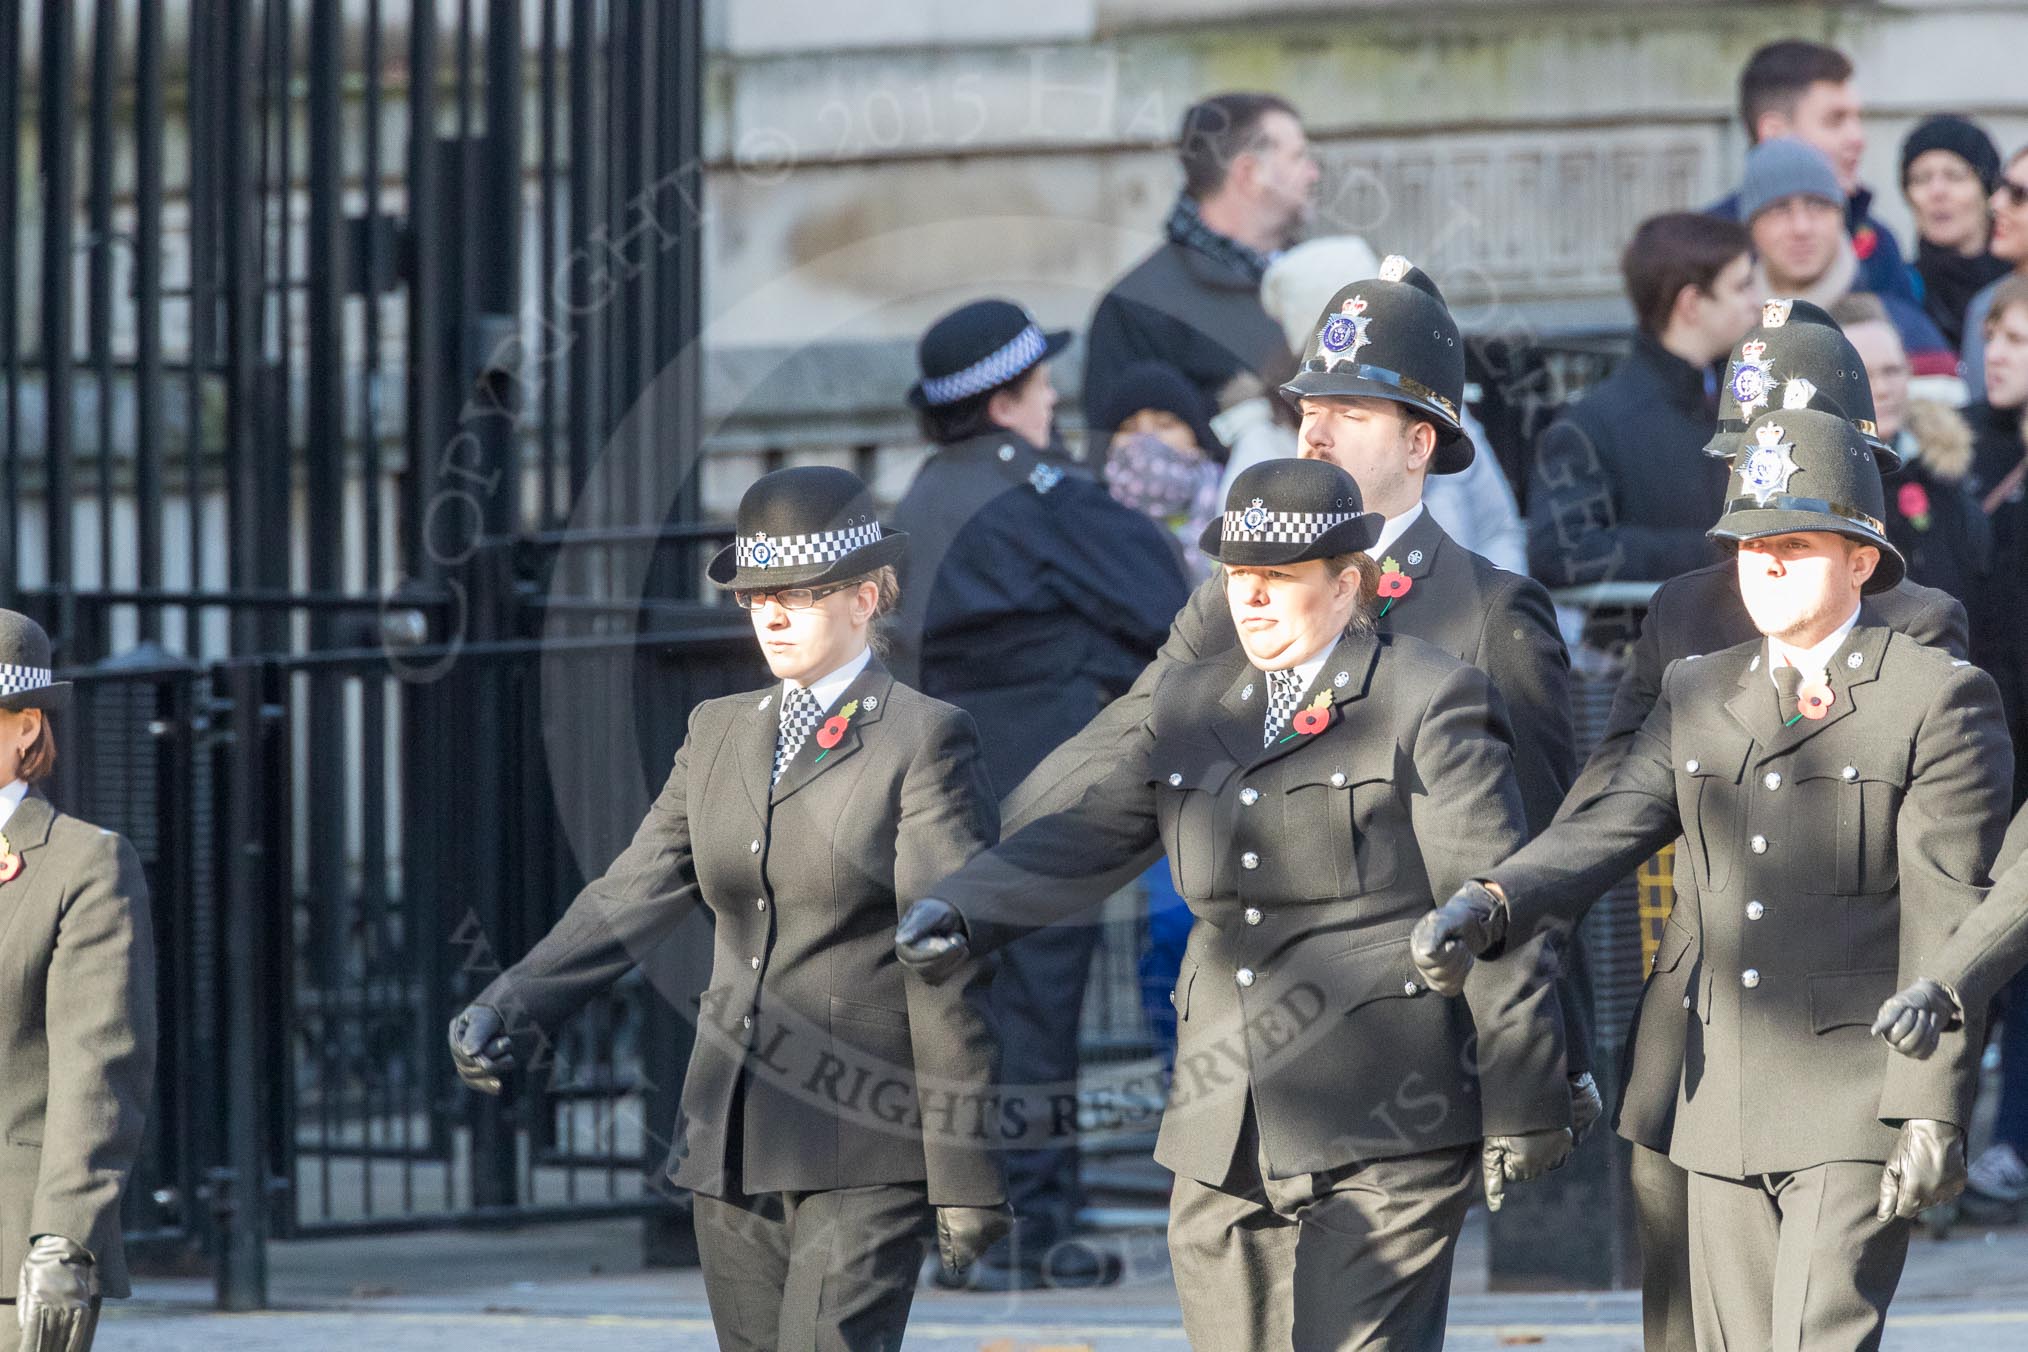 March Past, Remembrance Sunday at the Cenotaph 2016: M38 Cheshire Special Constabulary.
Cenotaph, Whitehall, London SW1,
London,
Greater London,
United Kingdom,
on 13 November 2016 at 13:19, image #2916